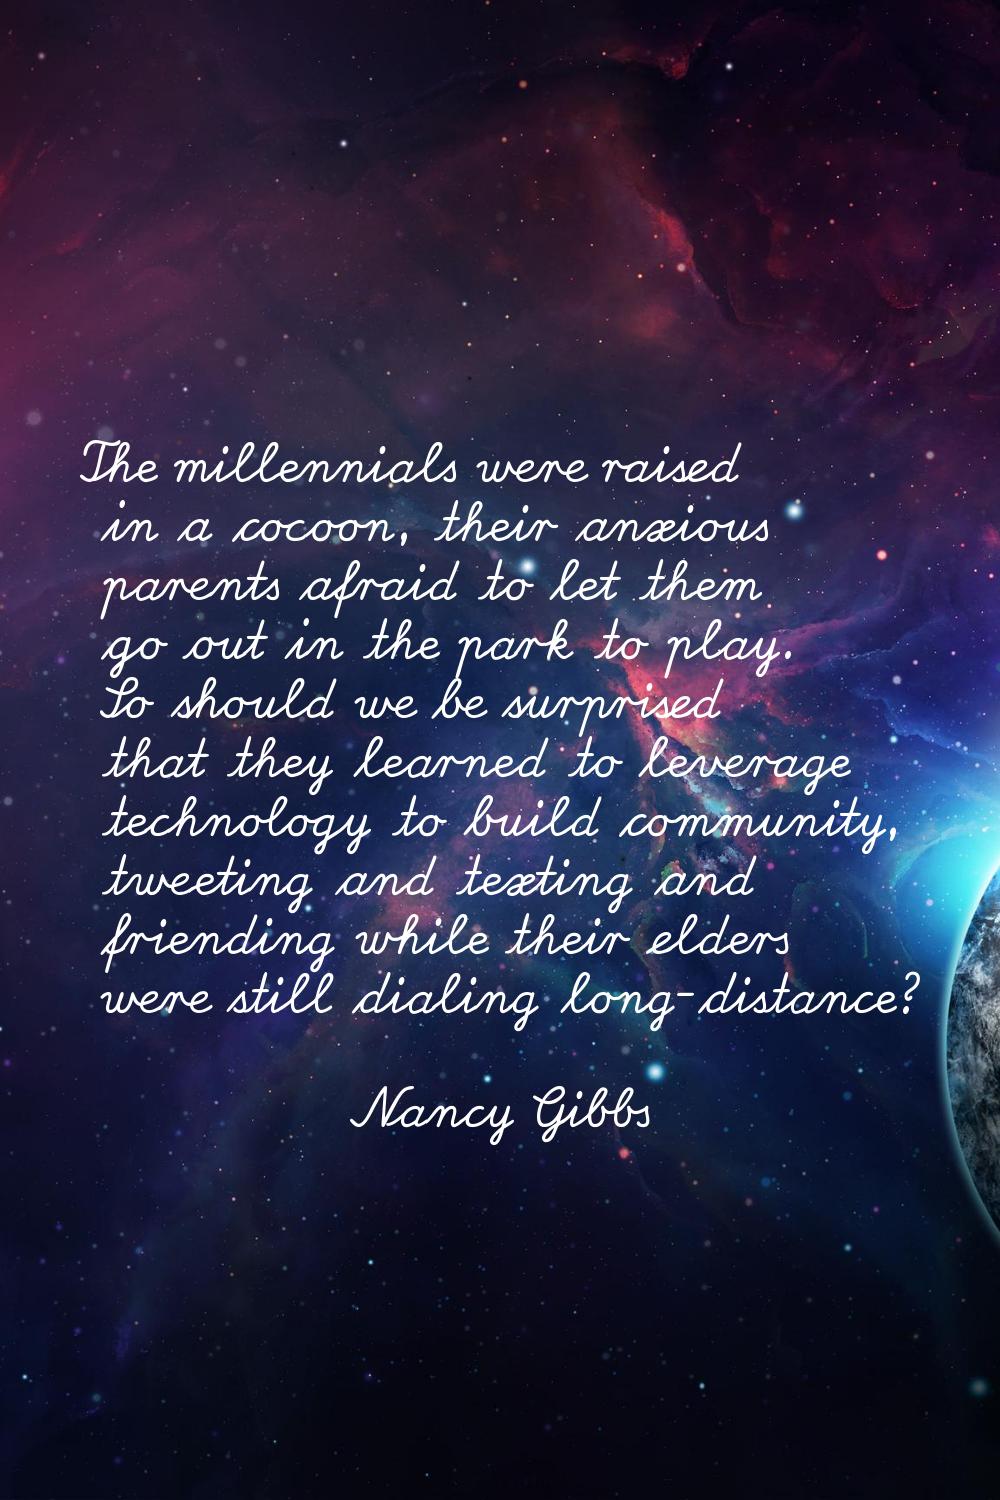 The millennials were raised in a cocoon, their anxious parents afraid to let them go out in the par